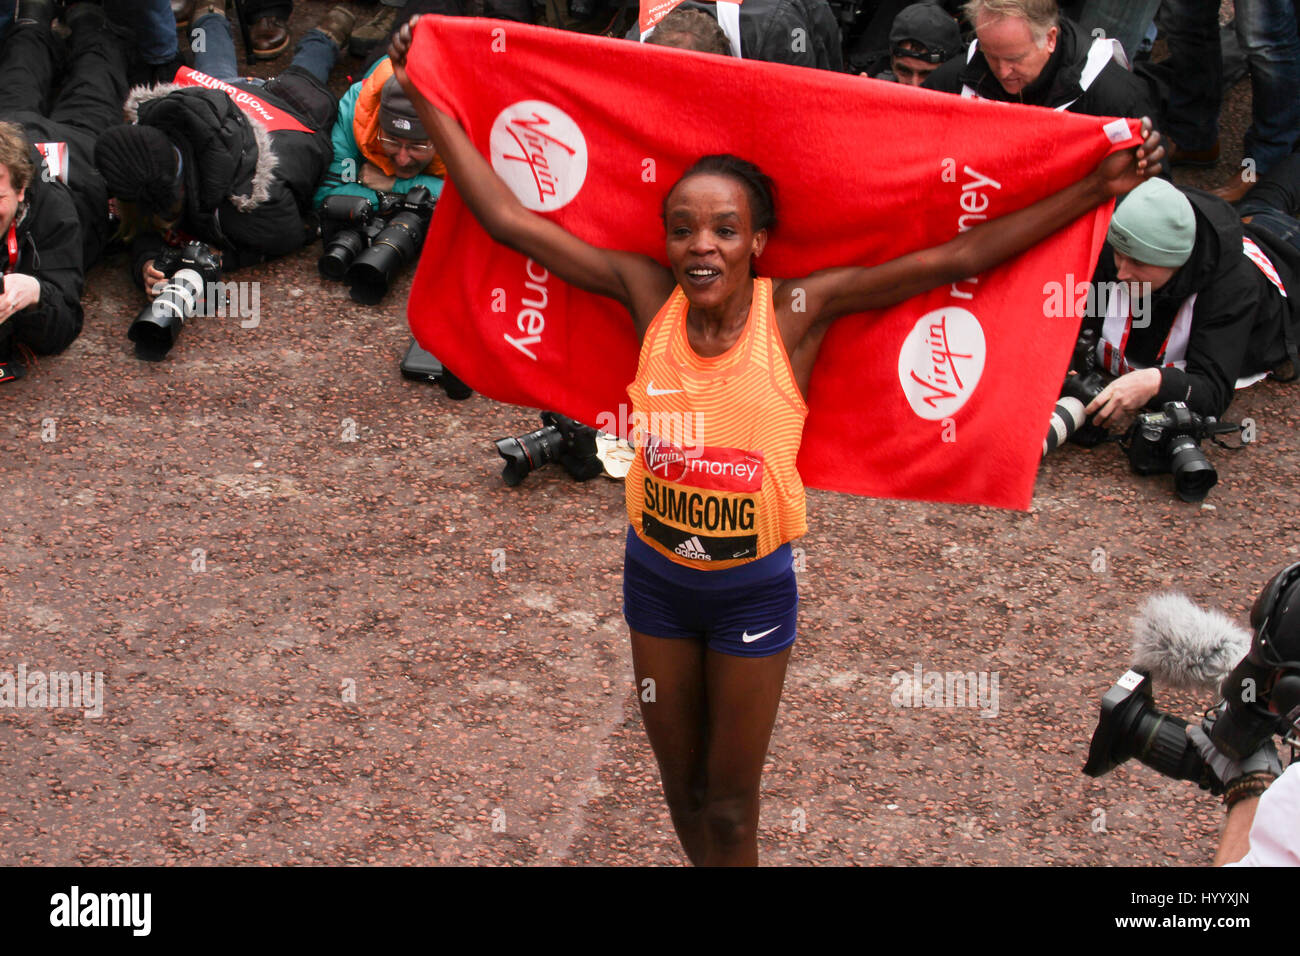 London, UK 24 April 2016. Jemima Sumgong (Kenya) poses for photos after winning the Virgin Money London Marathon in a time of 2:22:58.  The men's course records is 2:04:29 (2014), held by Wilson Kipsang and women's: 2:15:25 (2003) held by Paula Radcliffe. © David Mbiyu/Alamy Live News Stock Photo